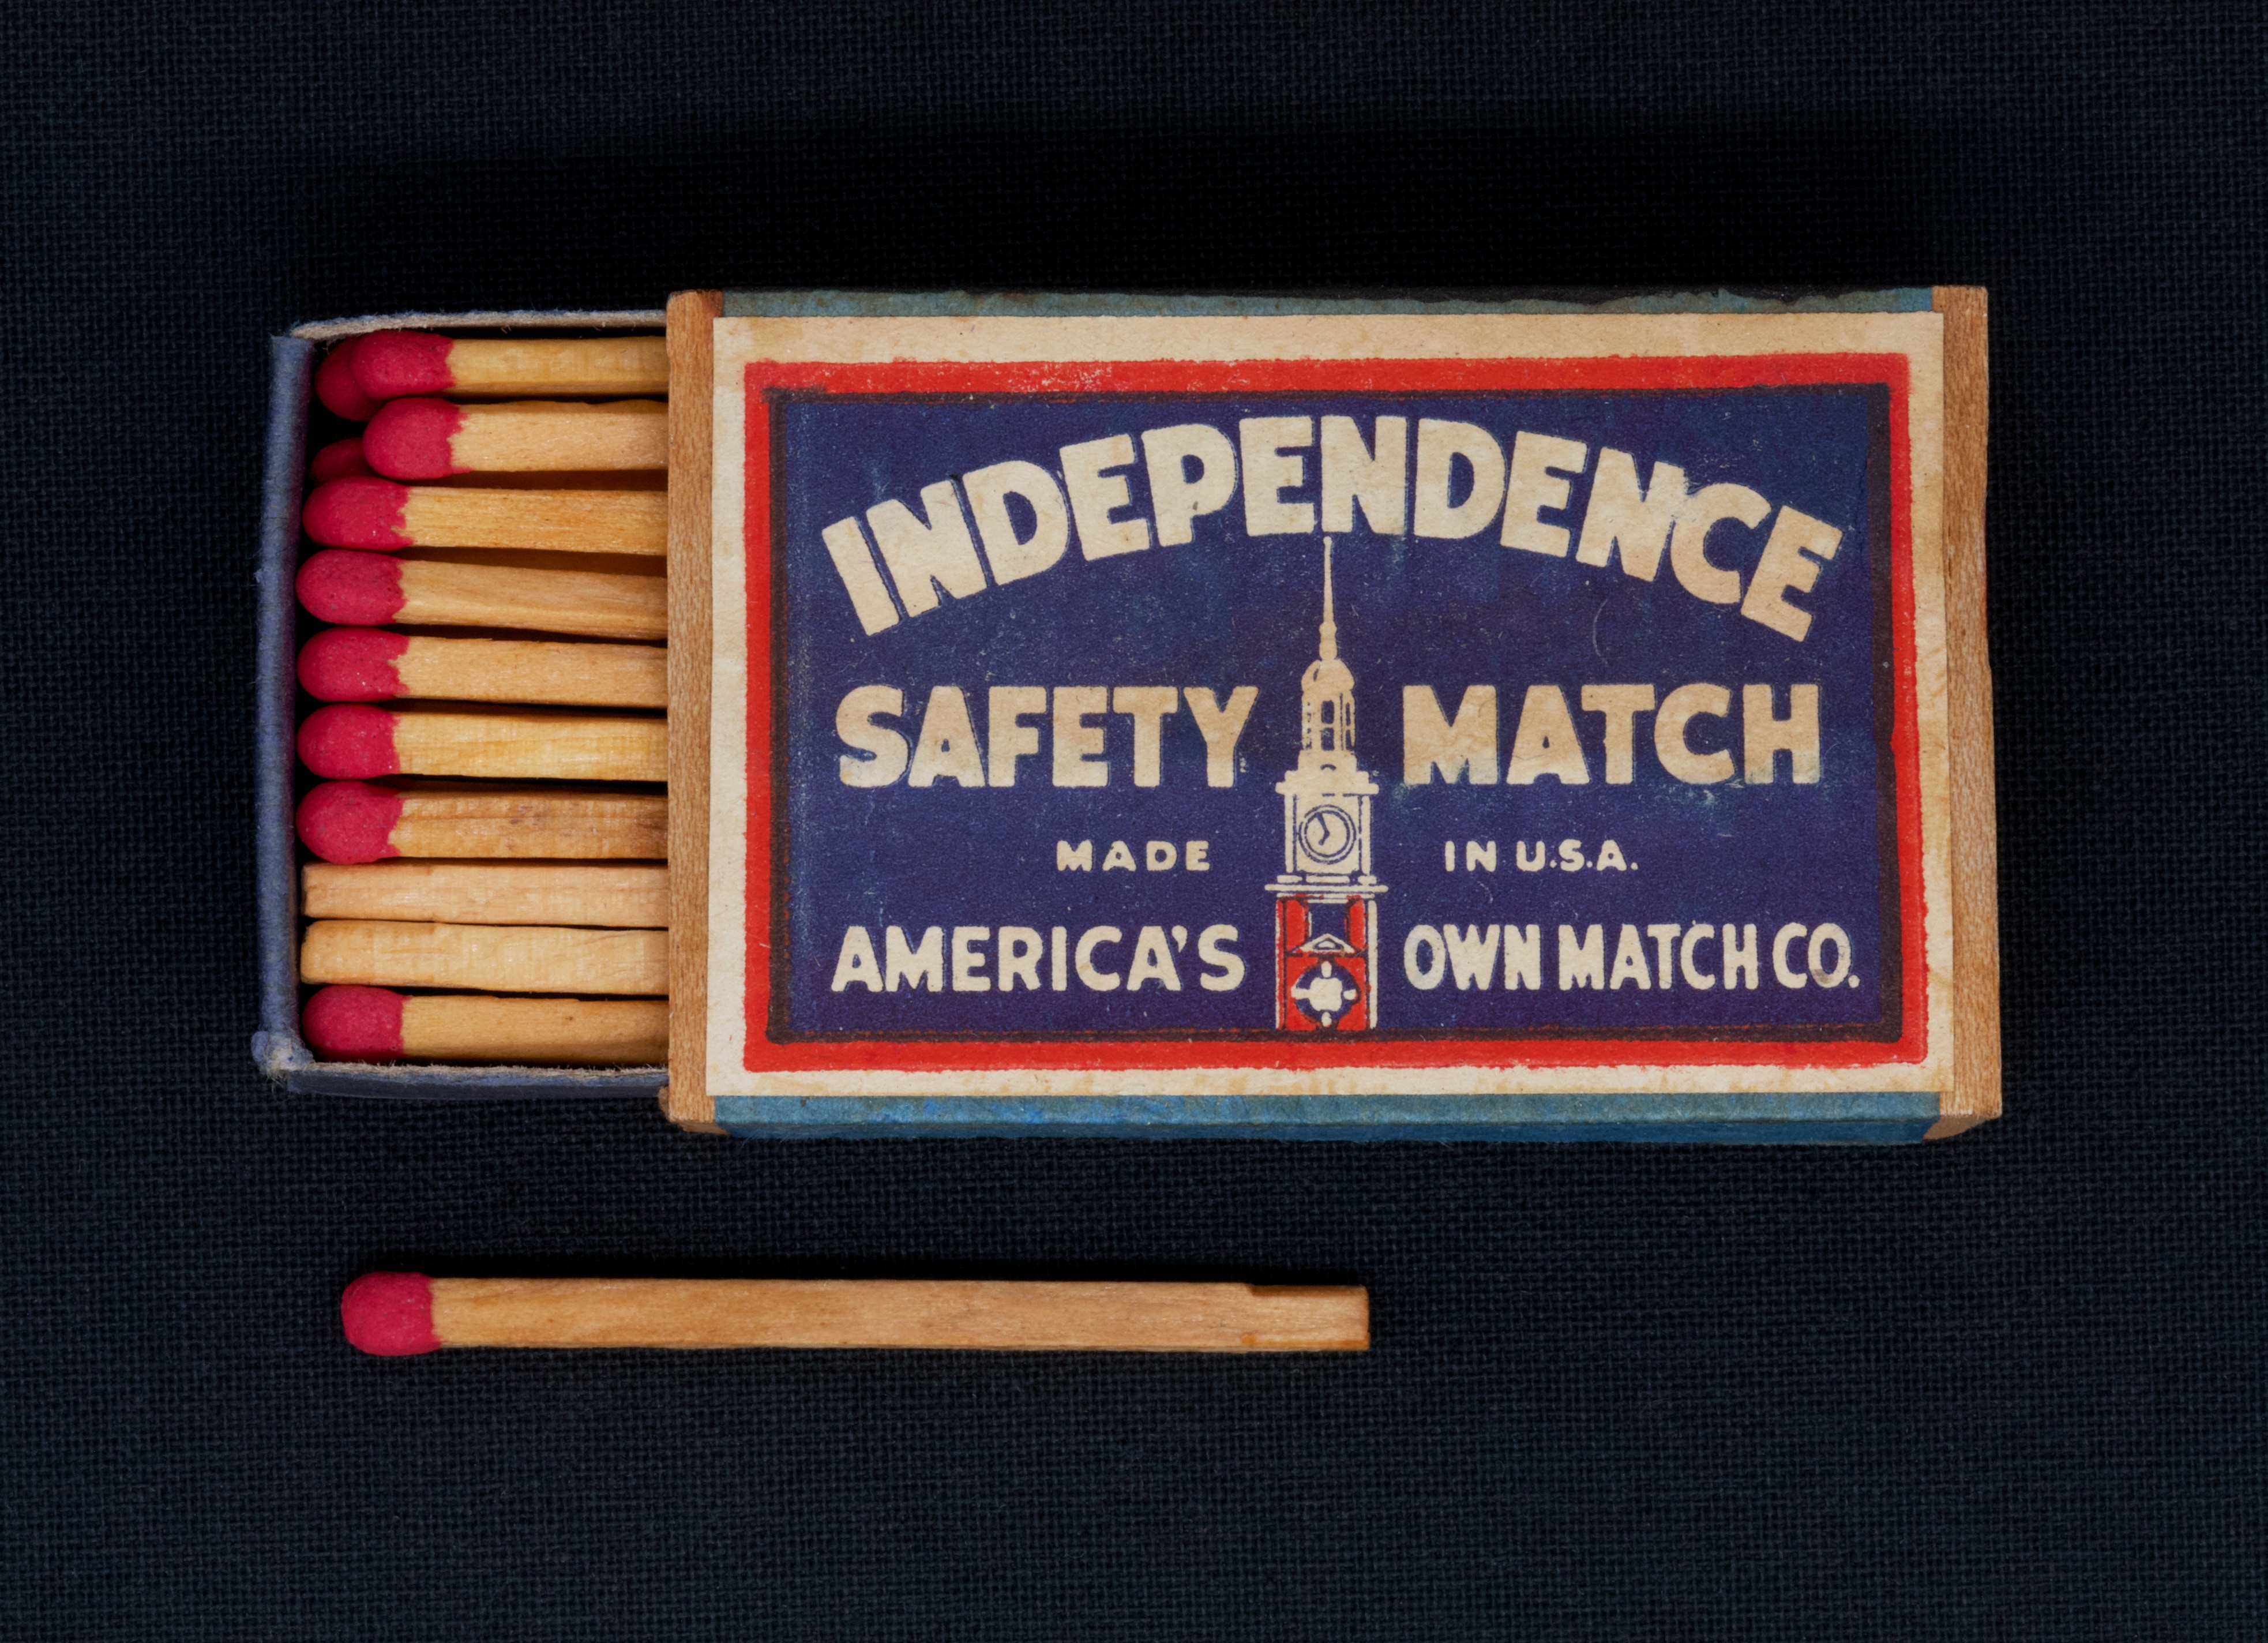 File:Safety matches Independence.jpg - Wikimedia Commons